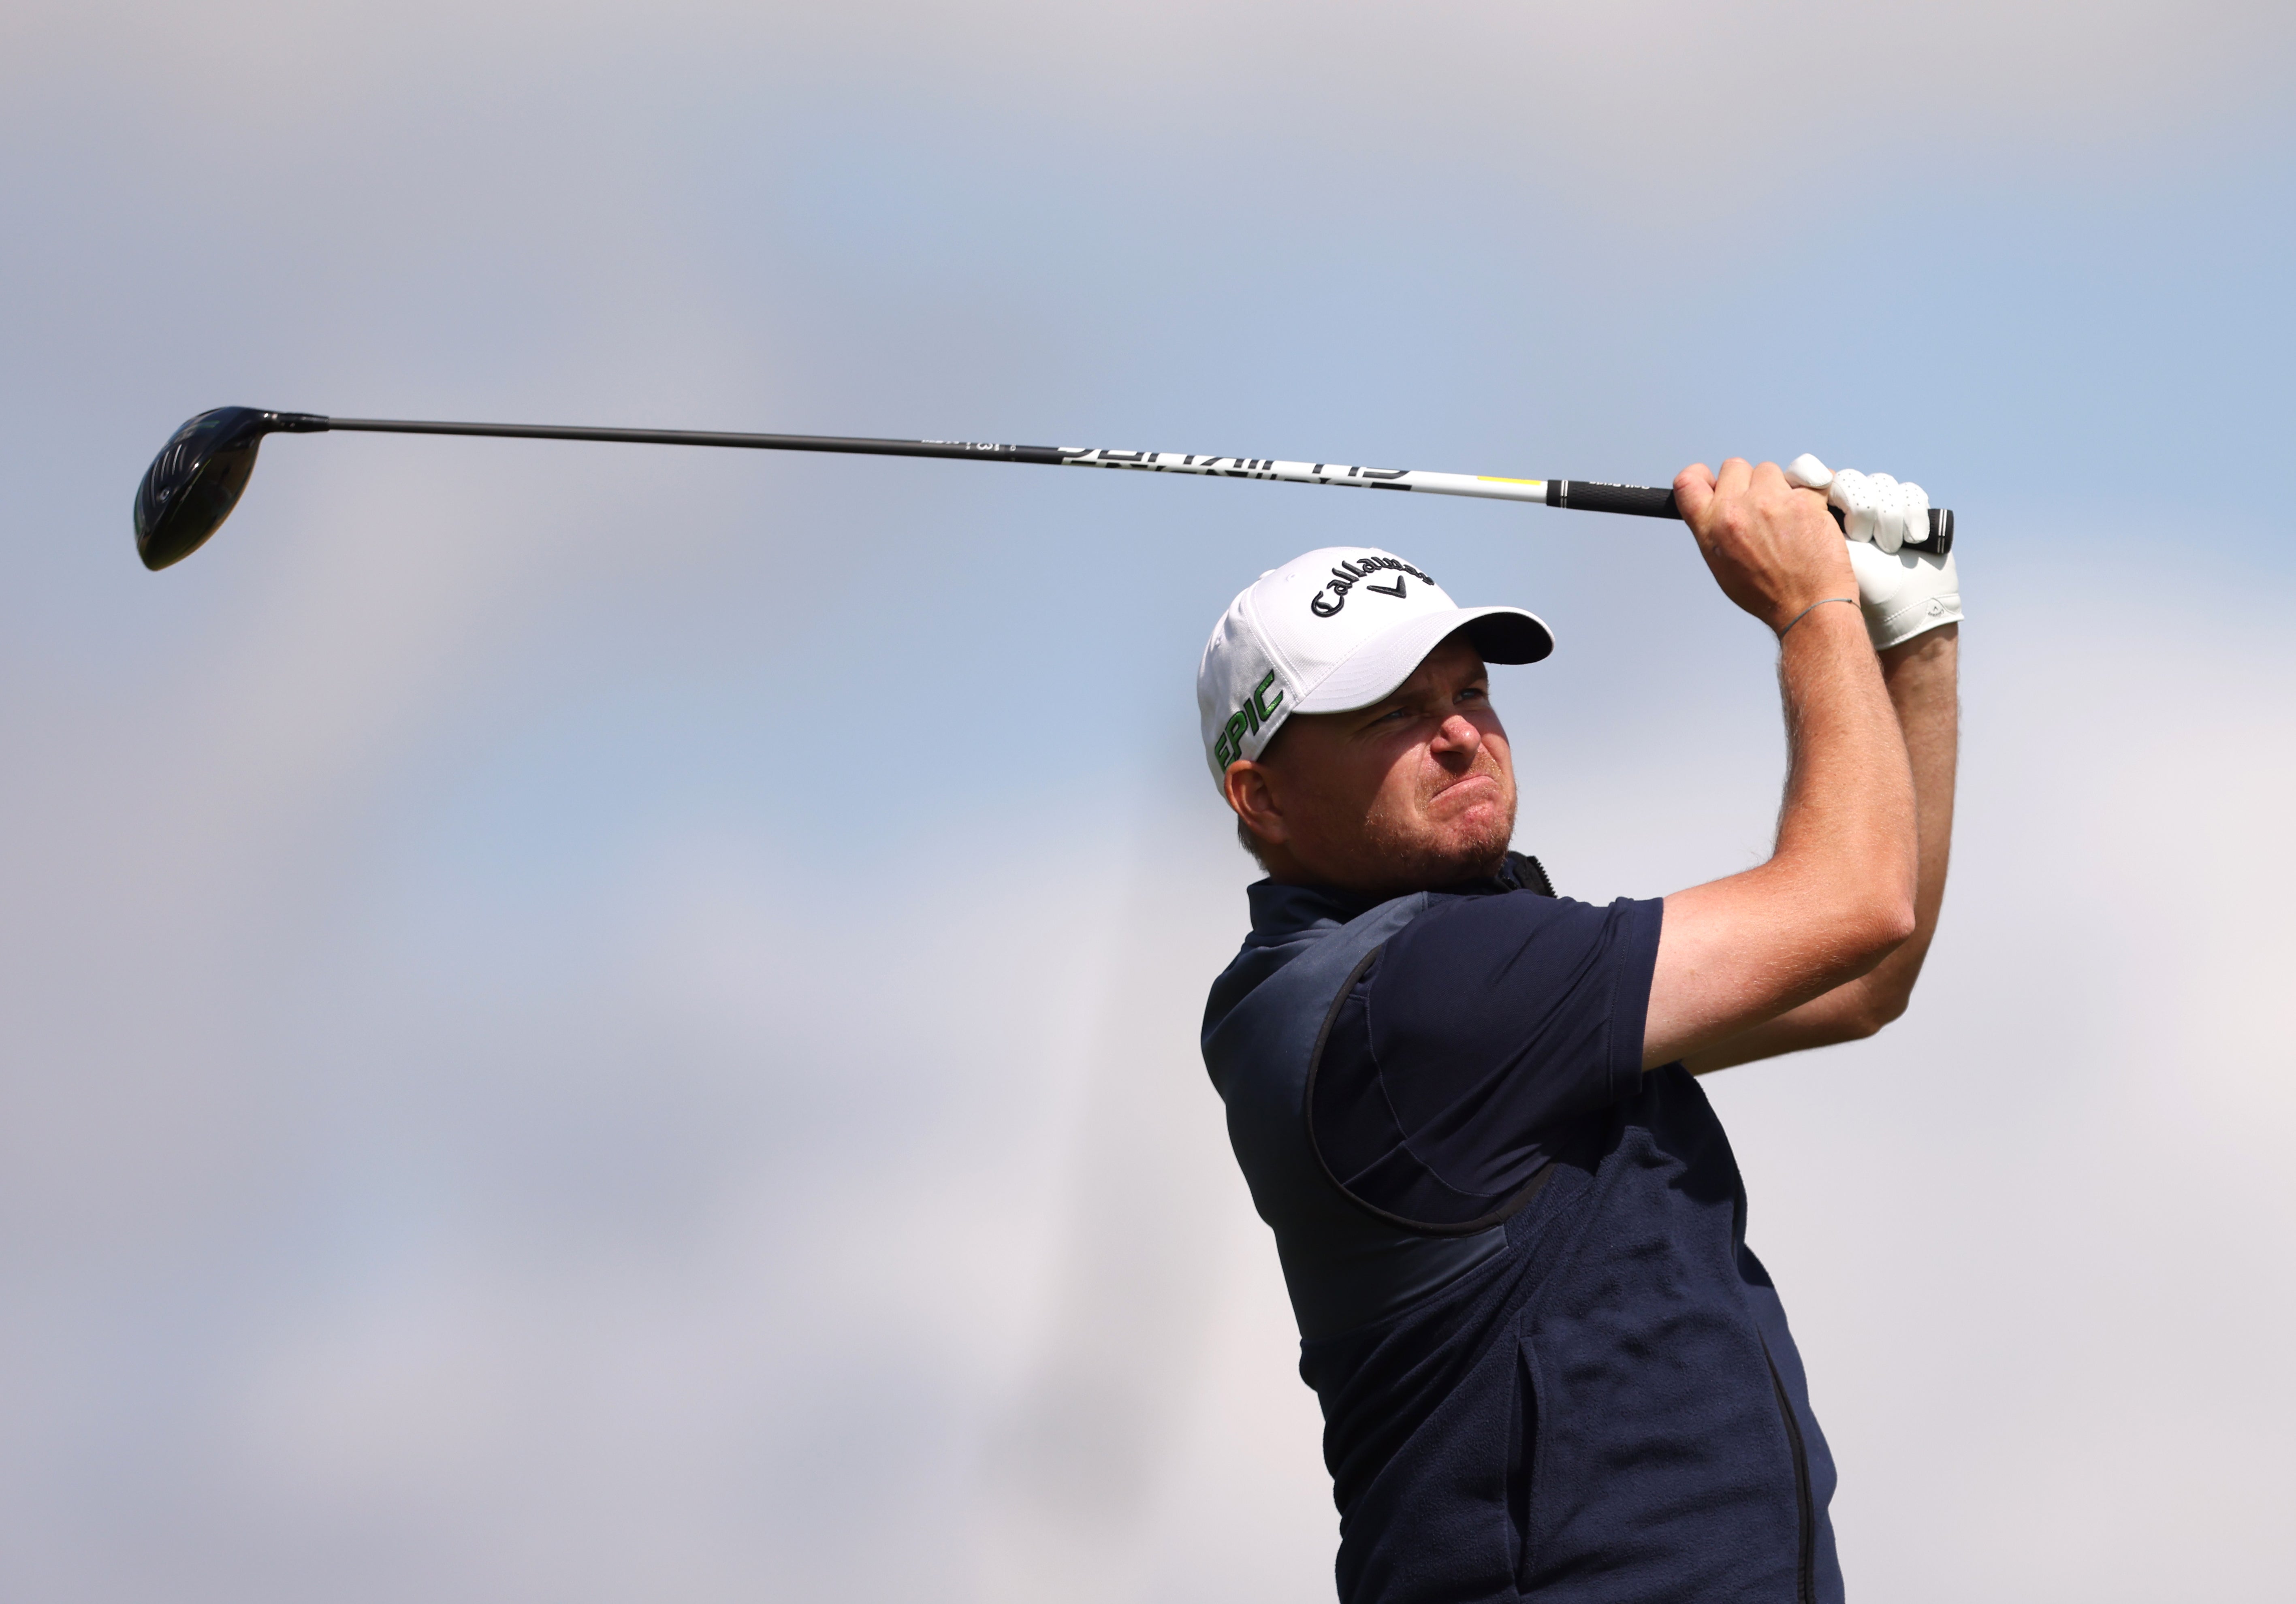 James Morrison set a blistering pace with an opening 60 in the Omega European Masters (Steven Paston/PA)